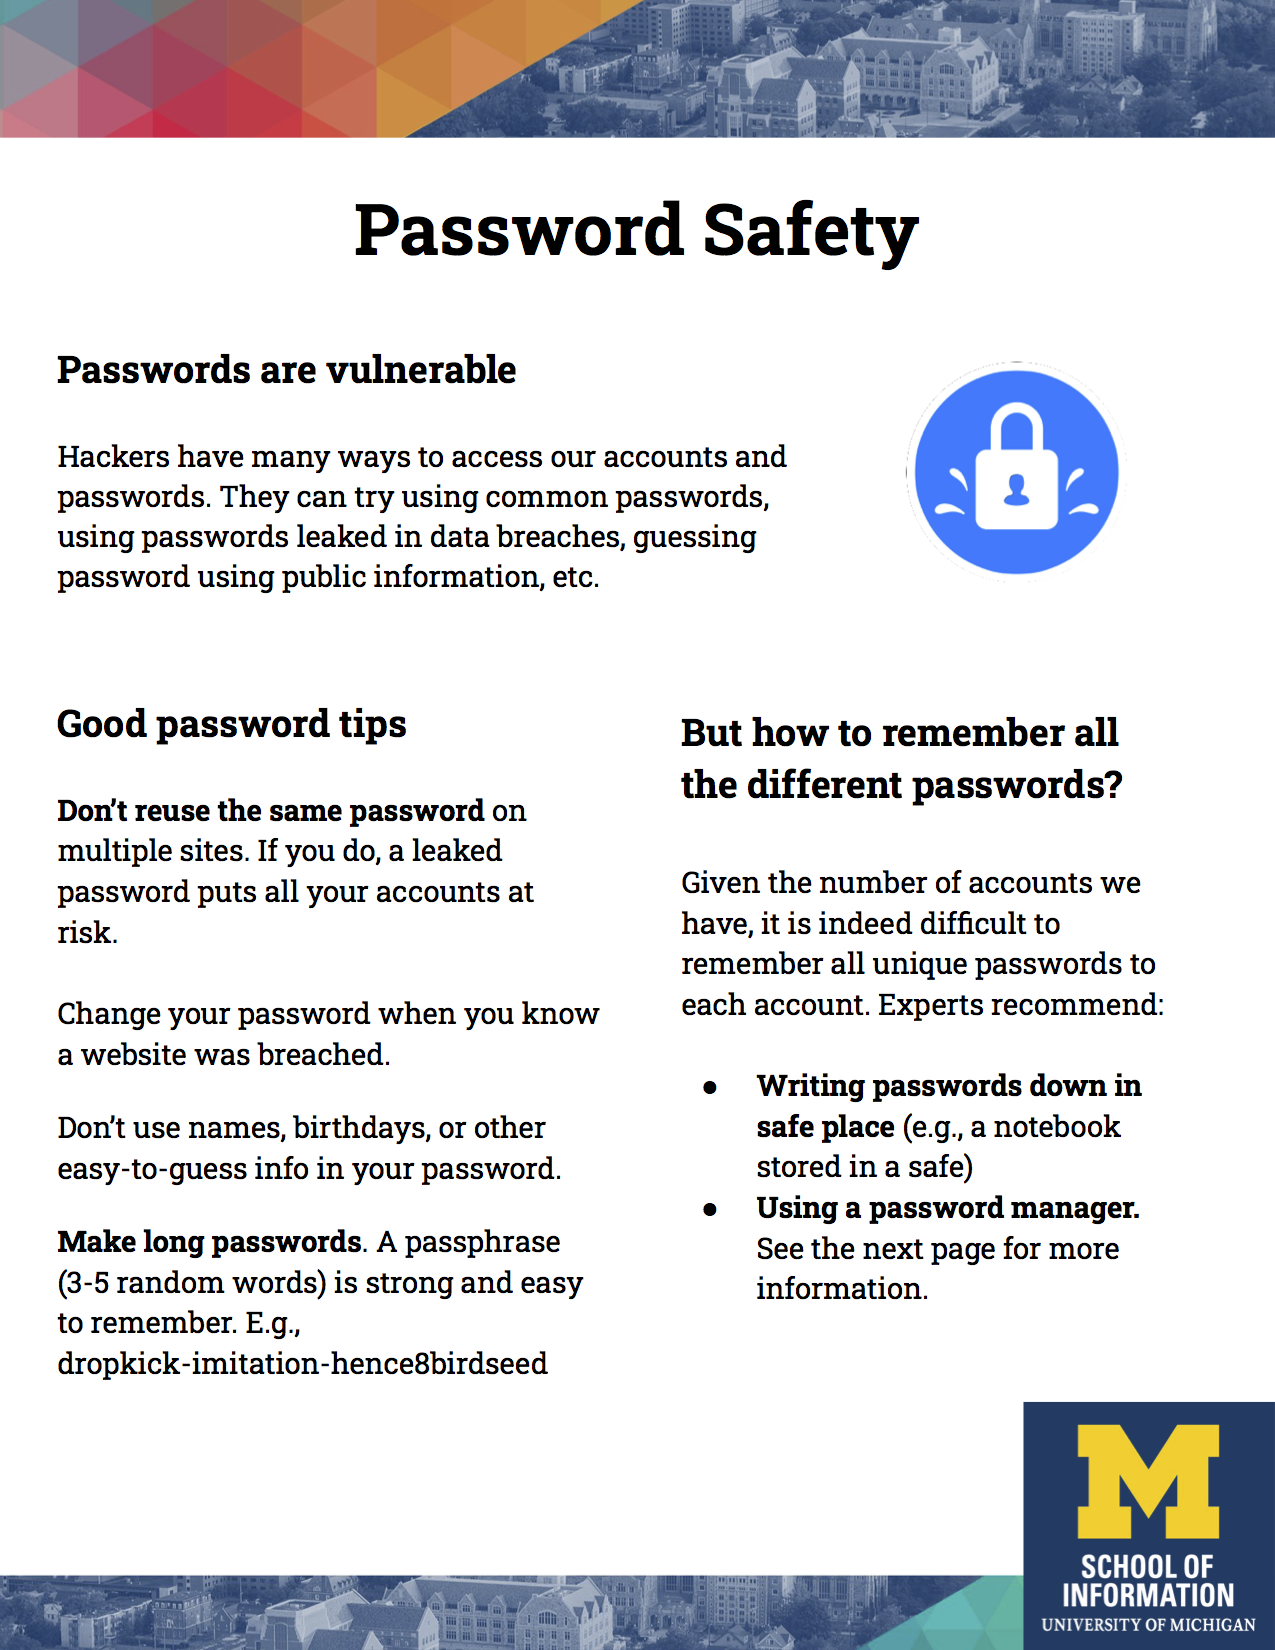 Preview of the Password Safety poster.